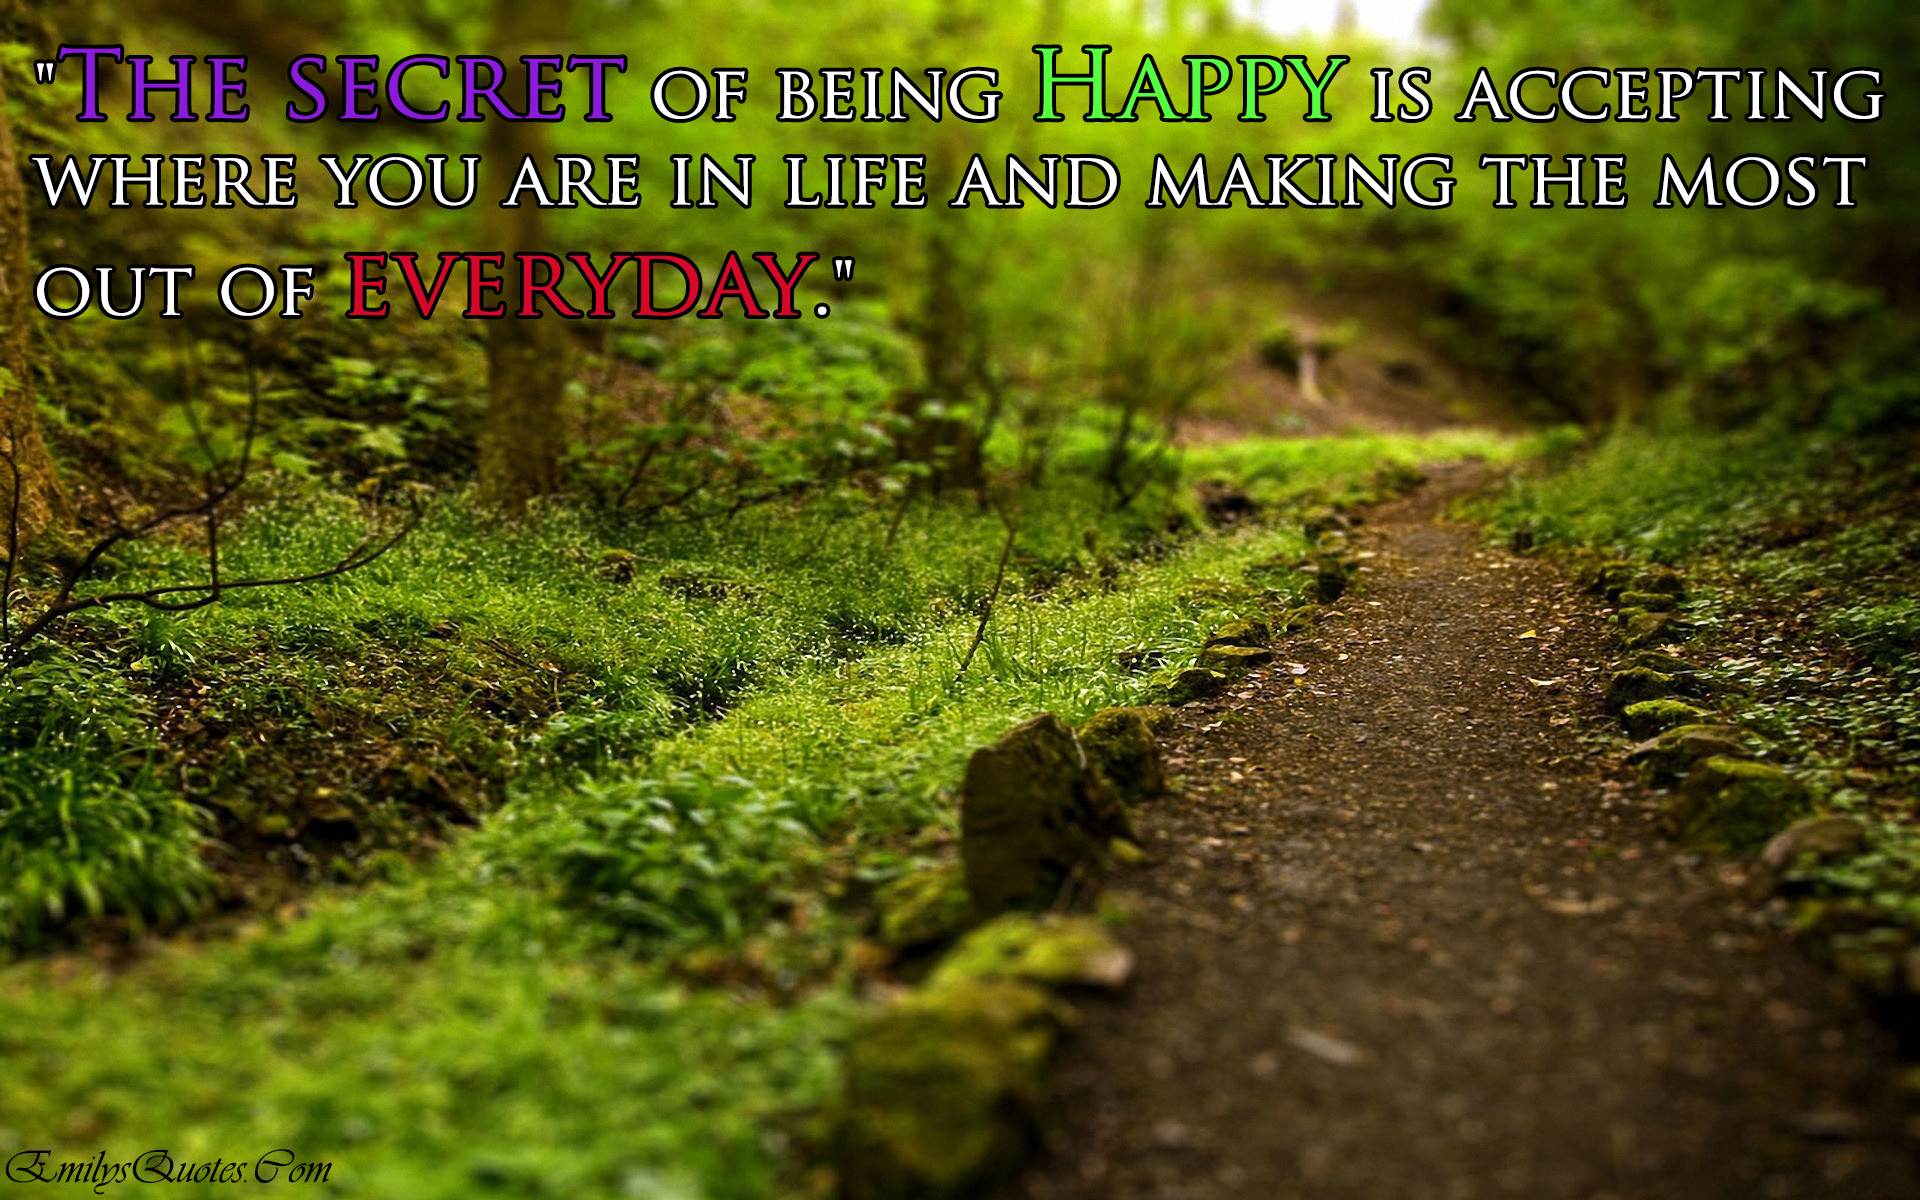 The secret of being Happy is accepting where you are in life and making the most out of every day